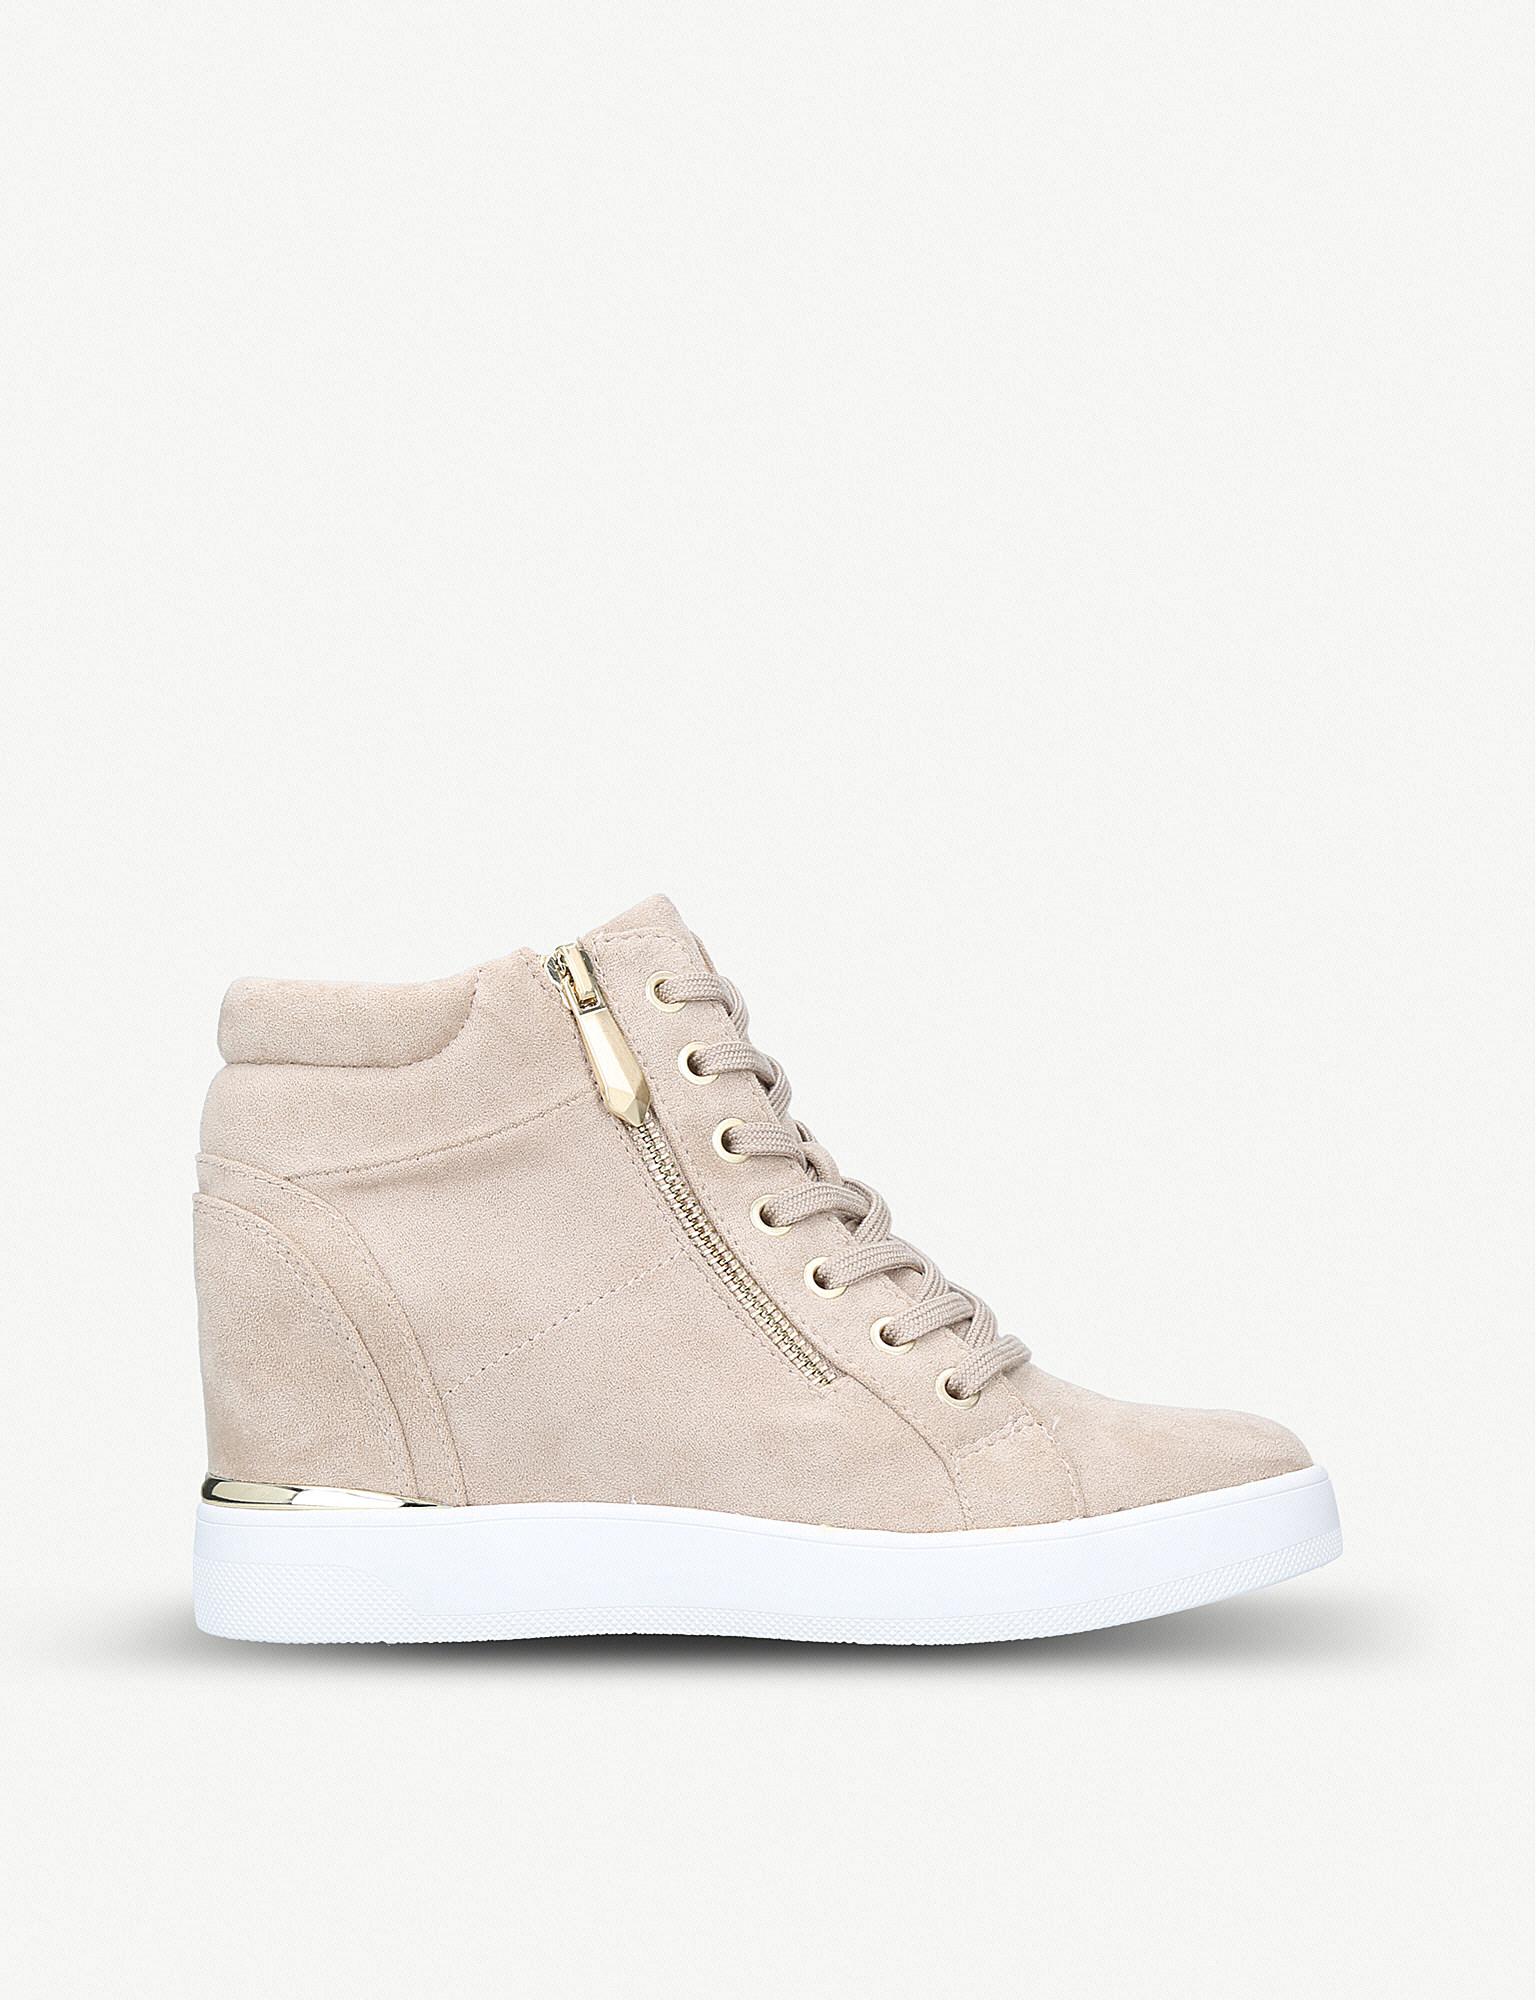 ALDO Wedged Trainers in Natural | Lyst